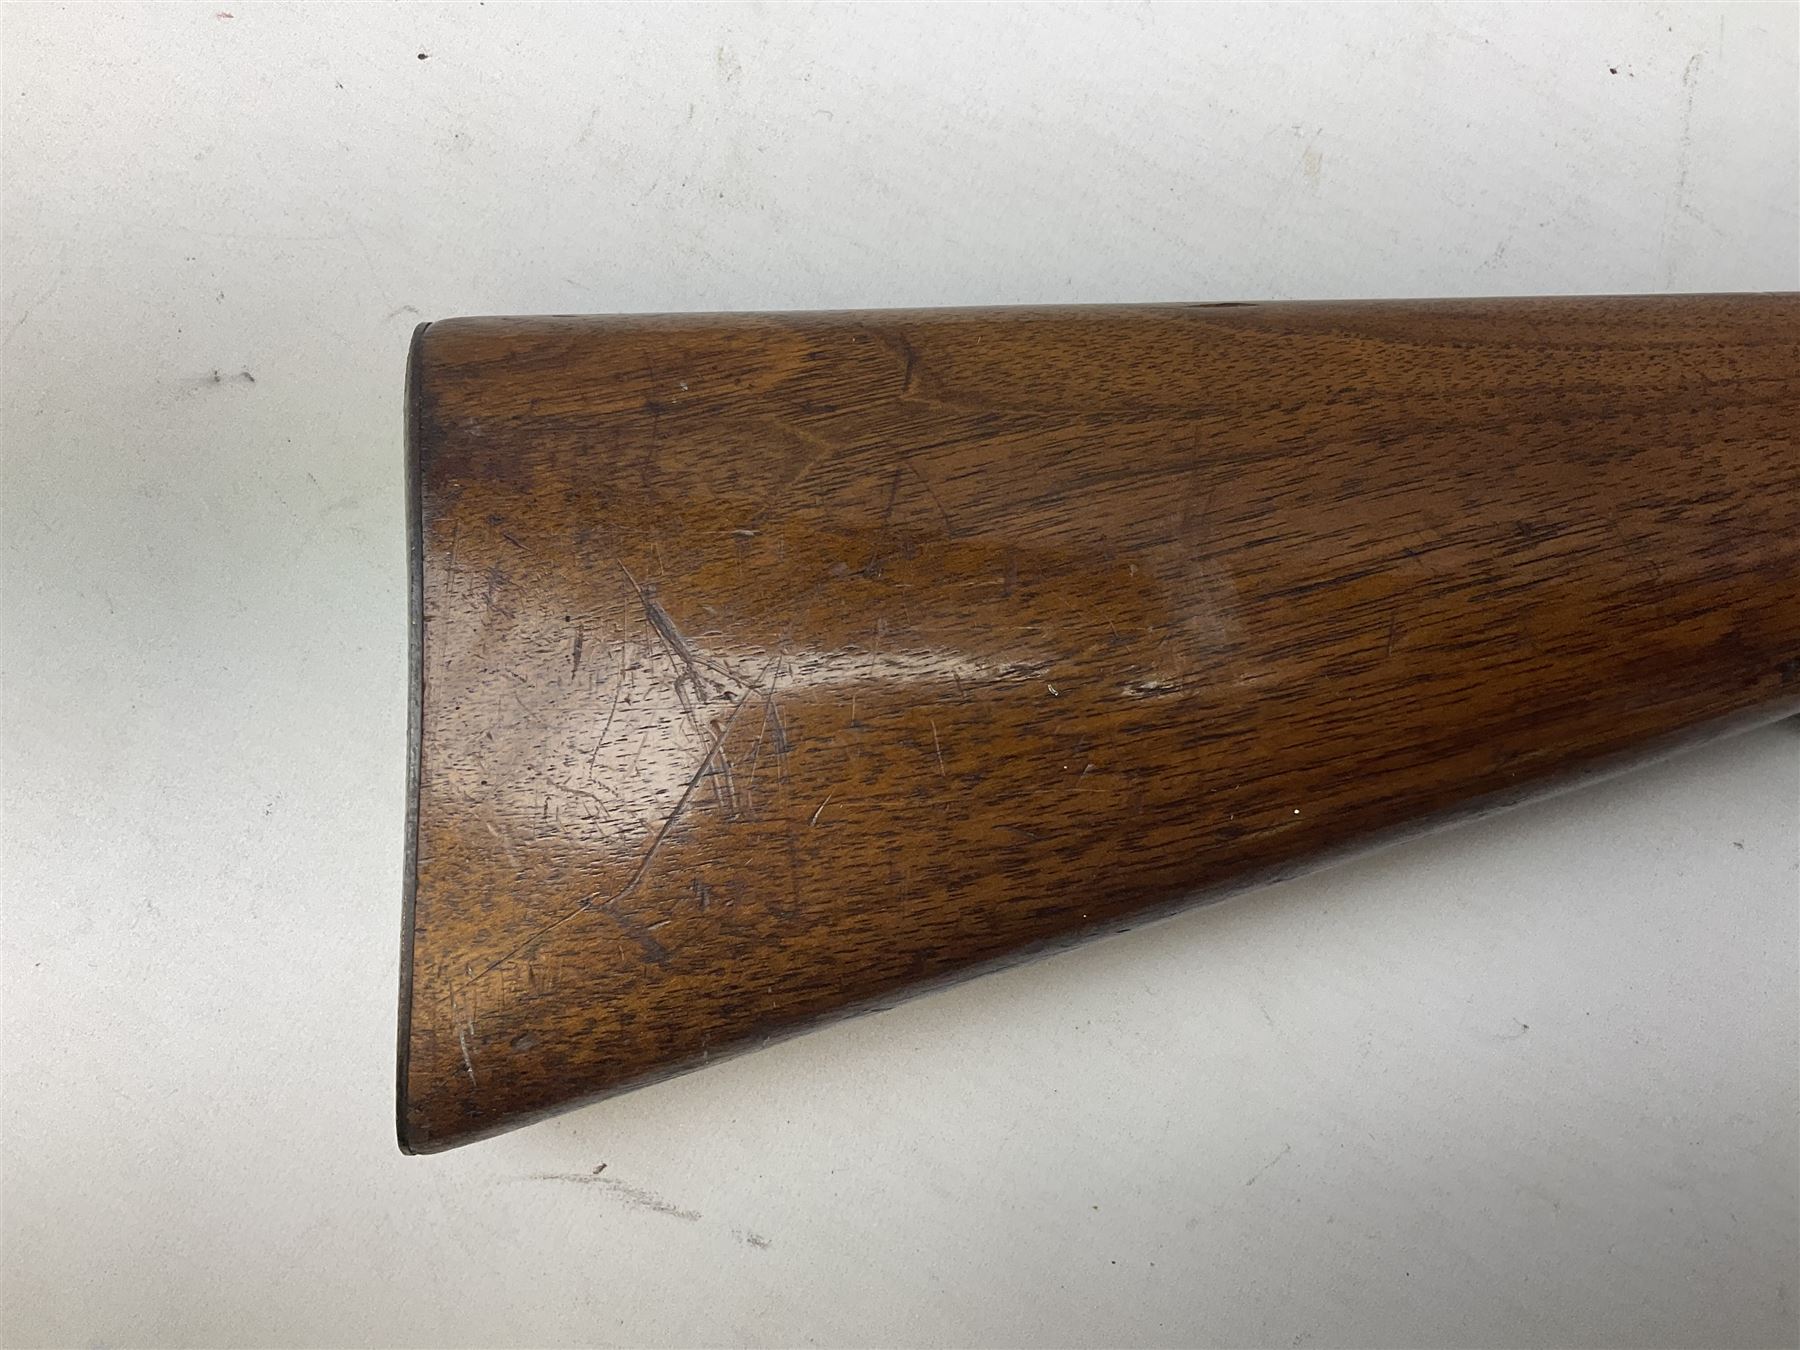 Diana Model 27 .177 air rifle with under lever action and walnut stock L108cm - Image 2 of 16